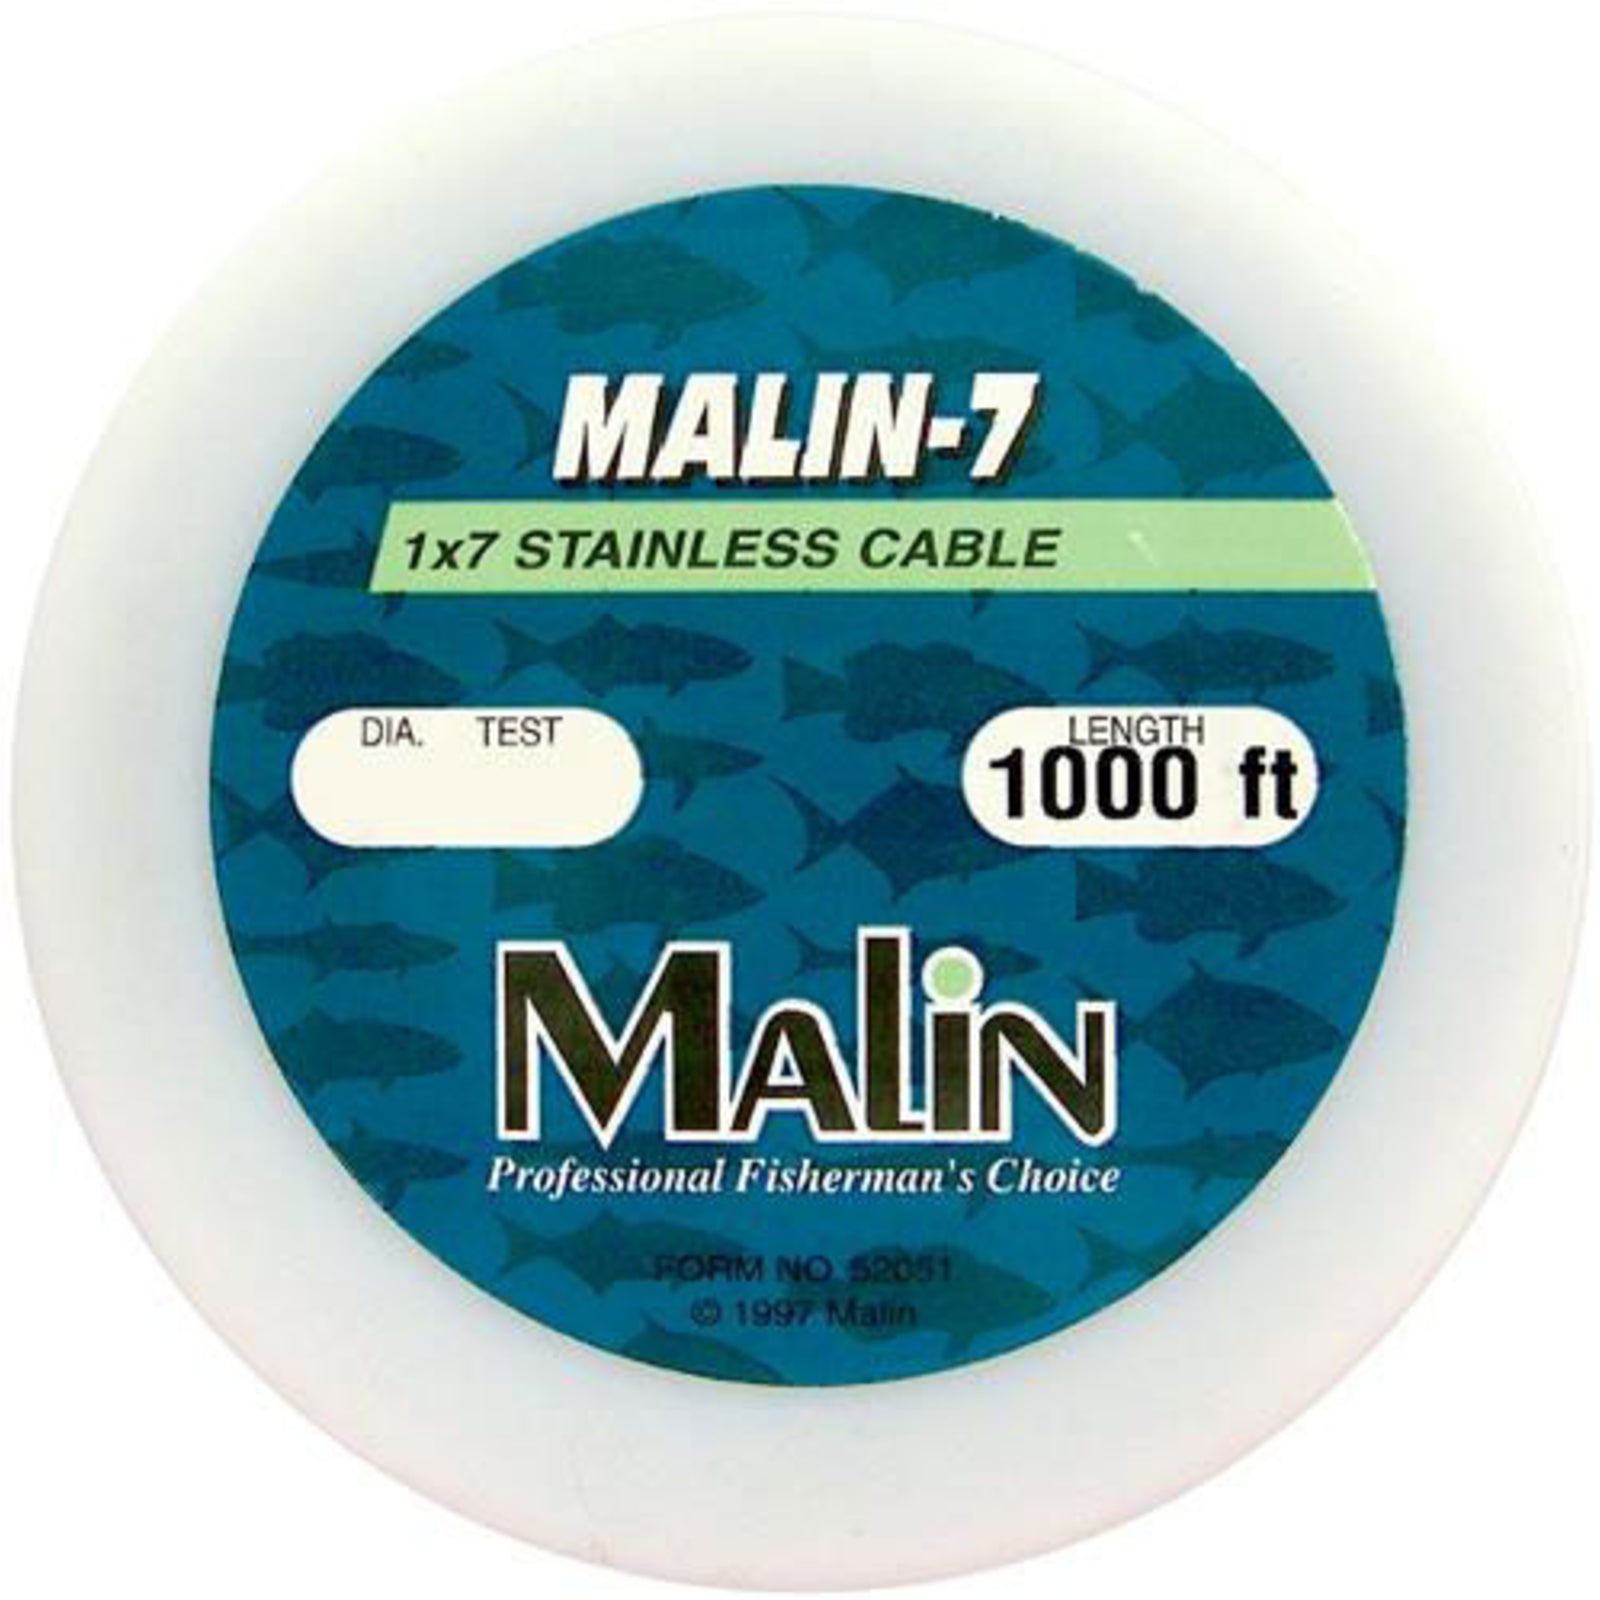 MALIN 7-STRAND STAINLESS STEEL WIRE 1000FT BRITE – Fat Nancy's Tackle Shop